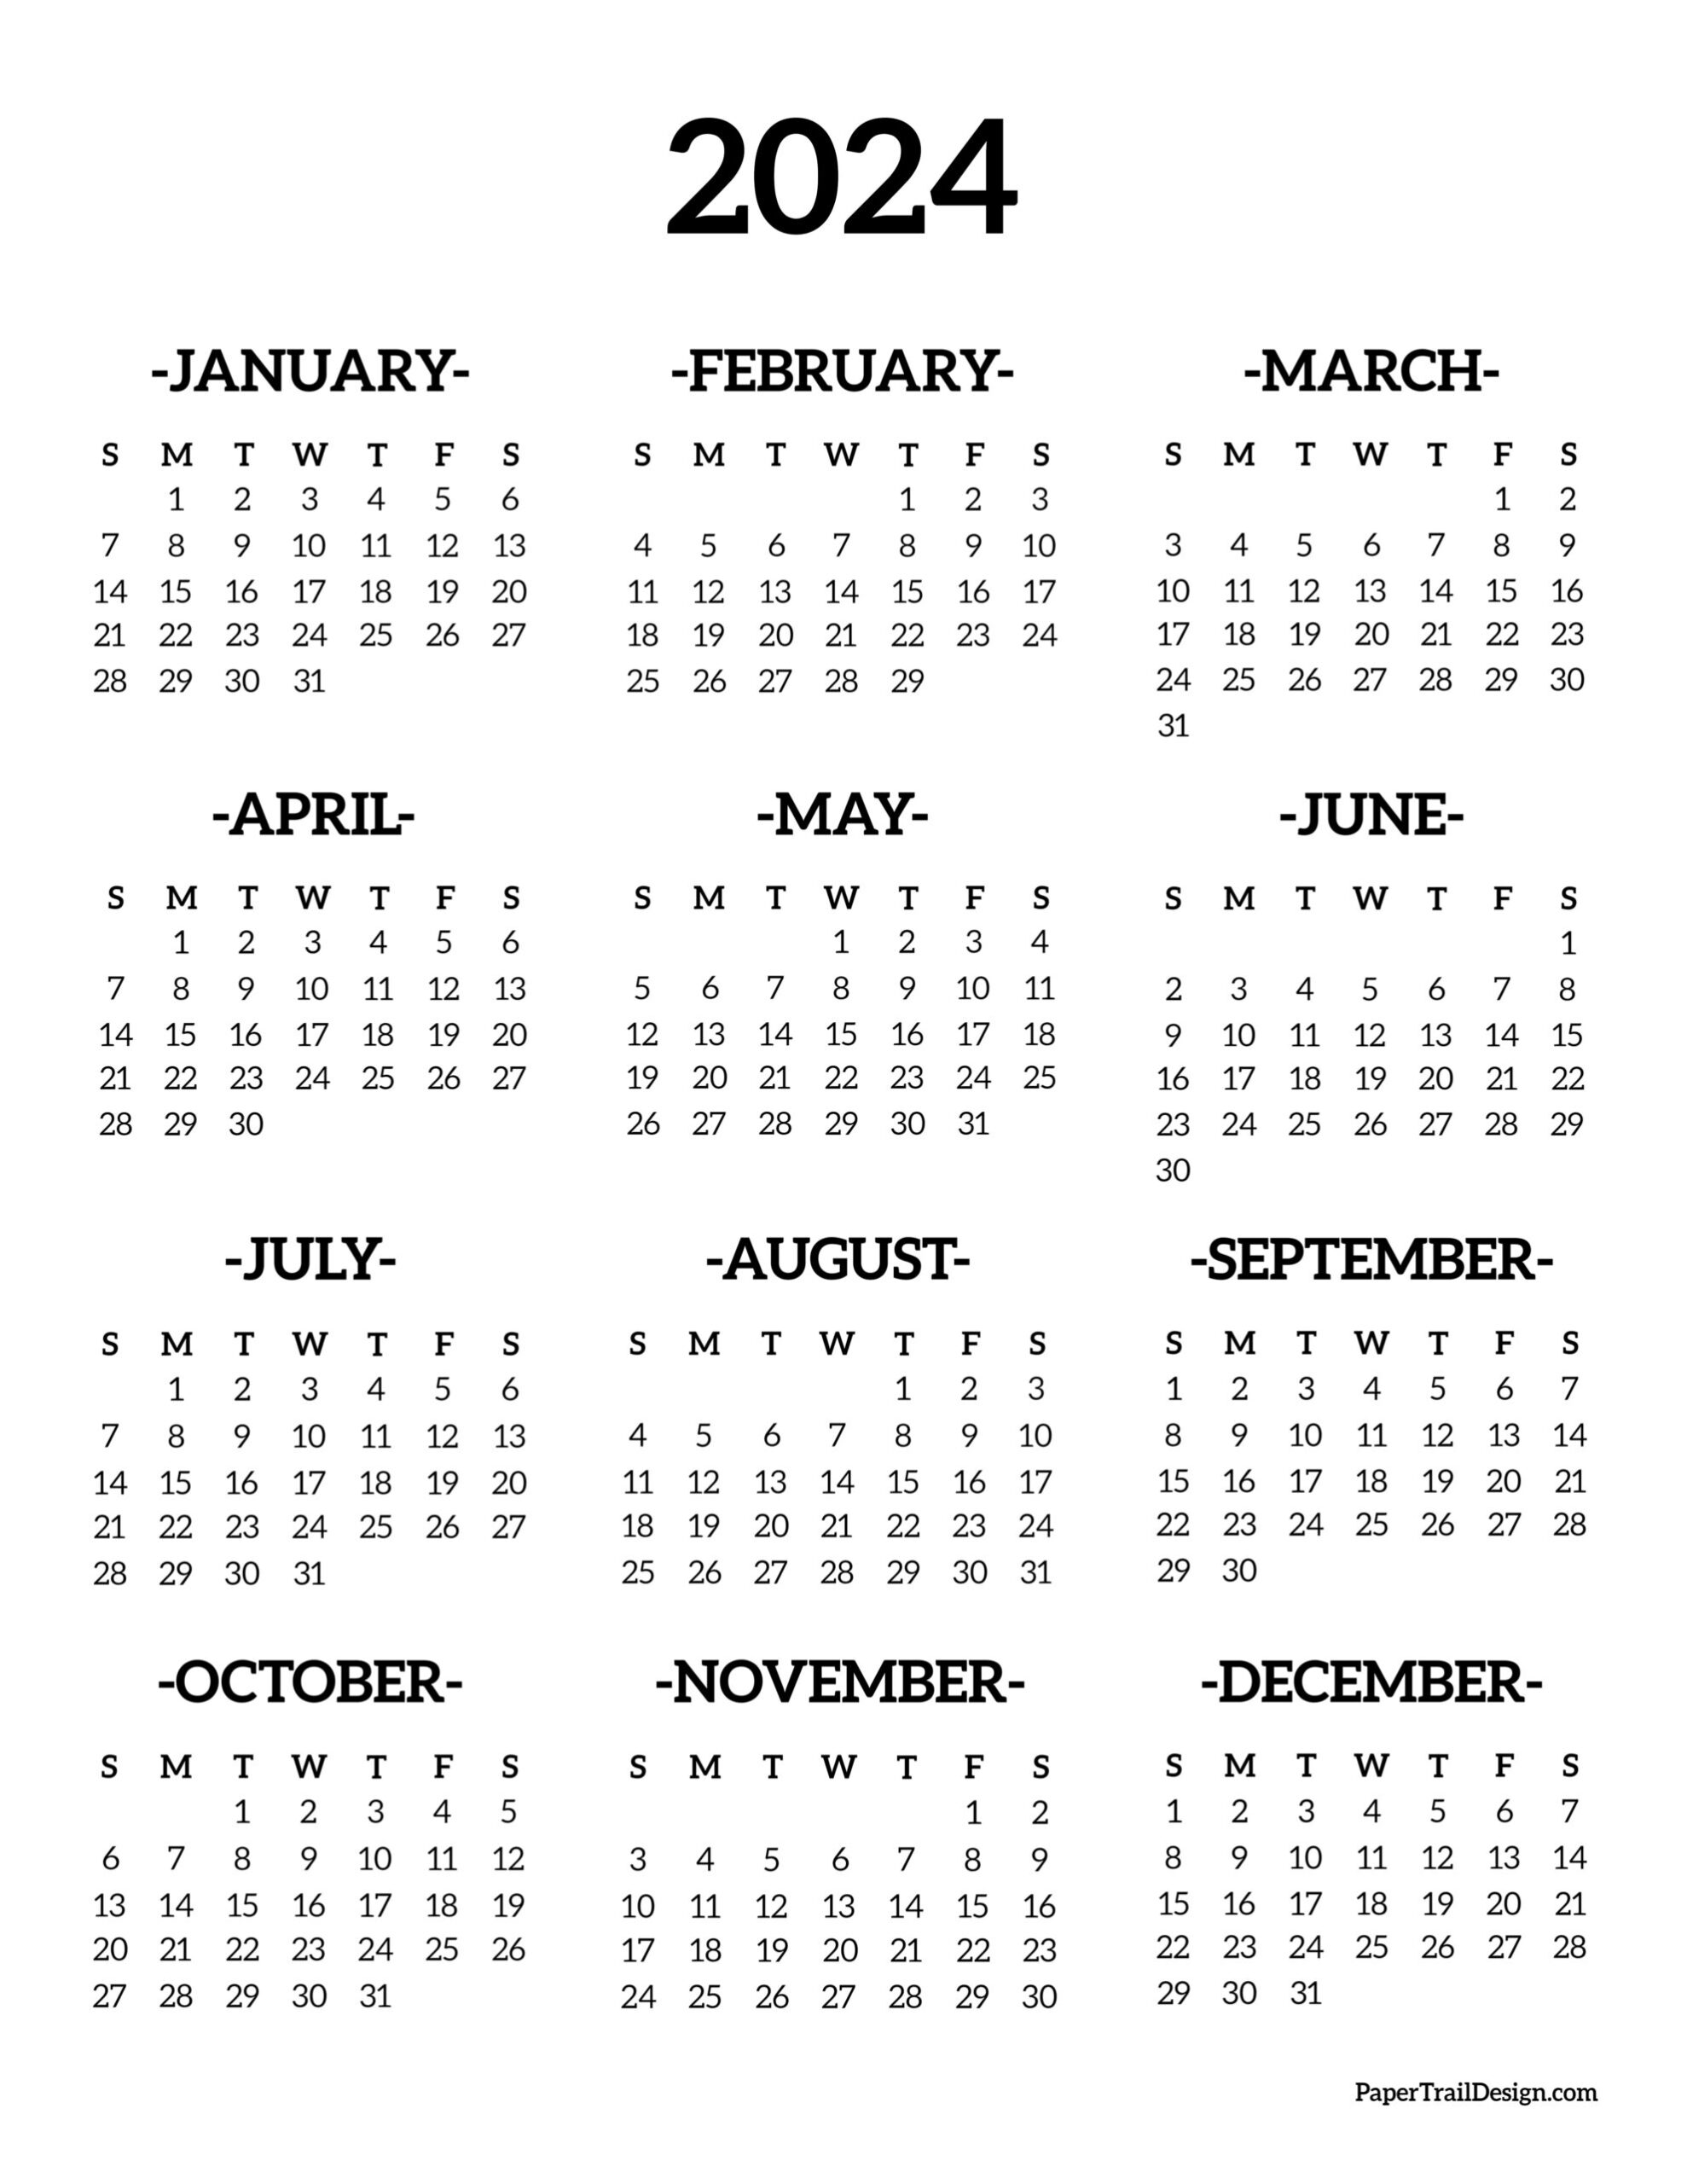 Calendar 2024 Printable One Page - Paper Trail Design for Calendar For Year 2024 Printable